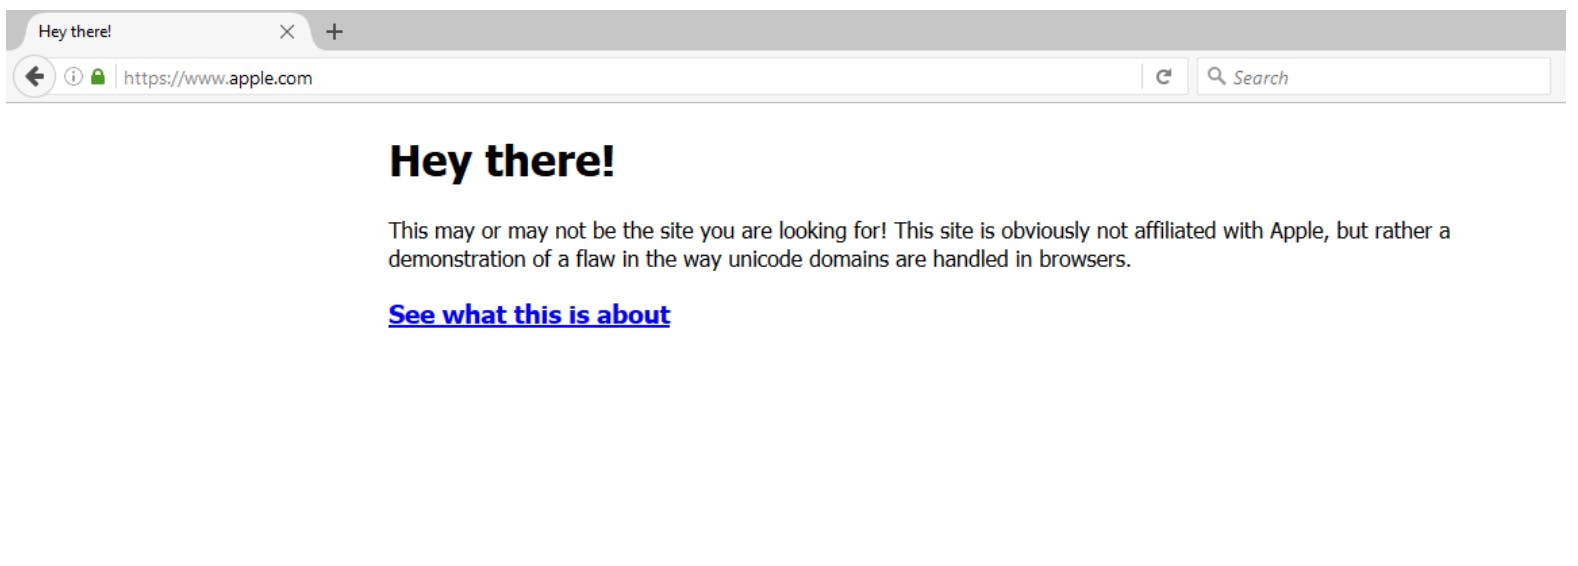 An example of a browser phishing attack